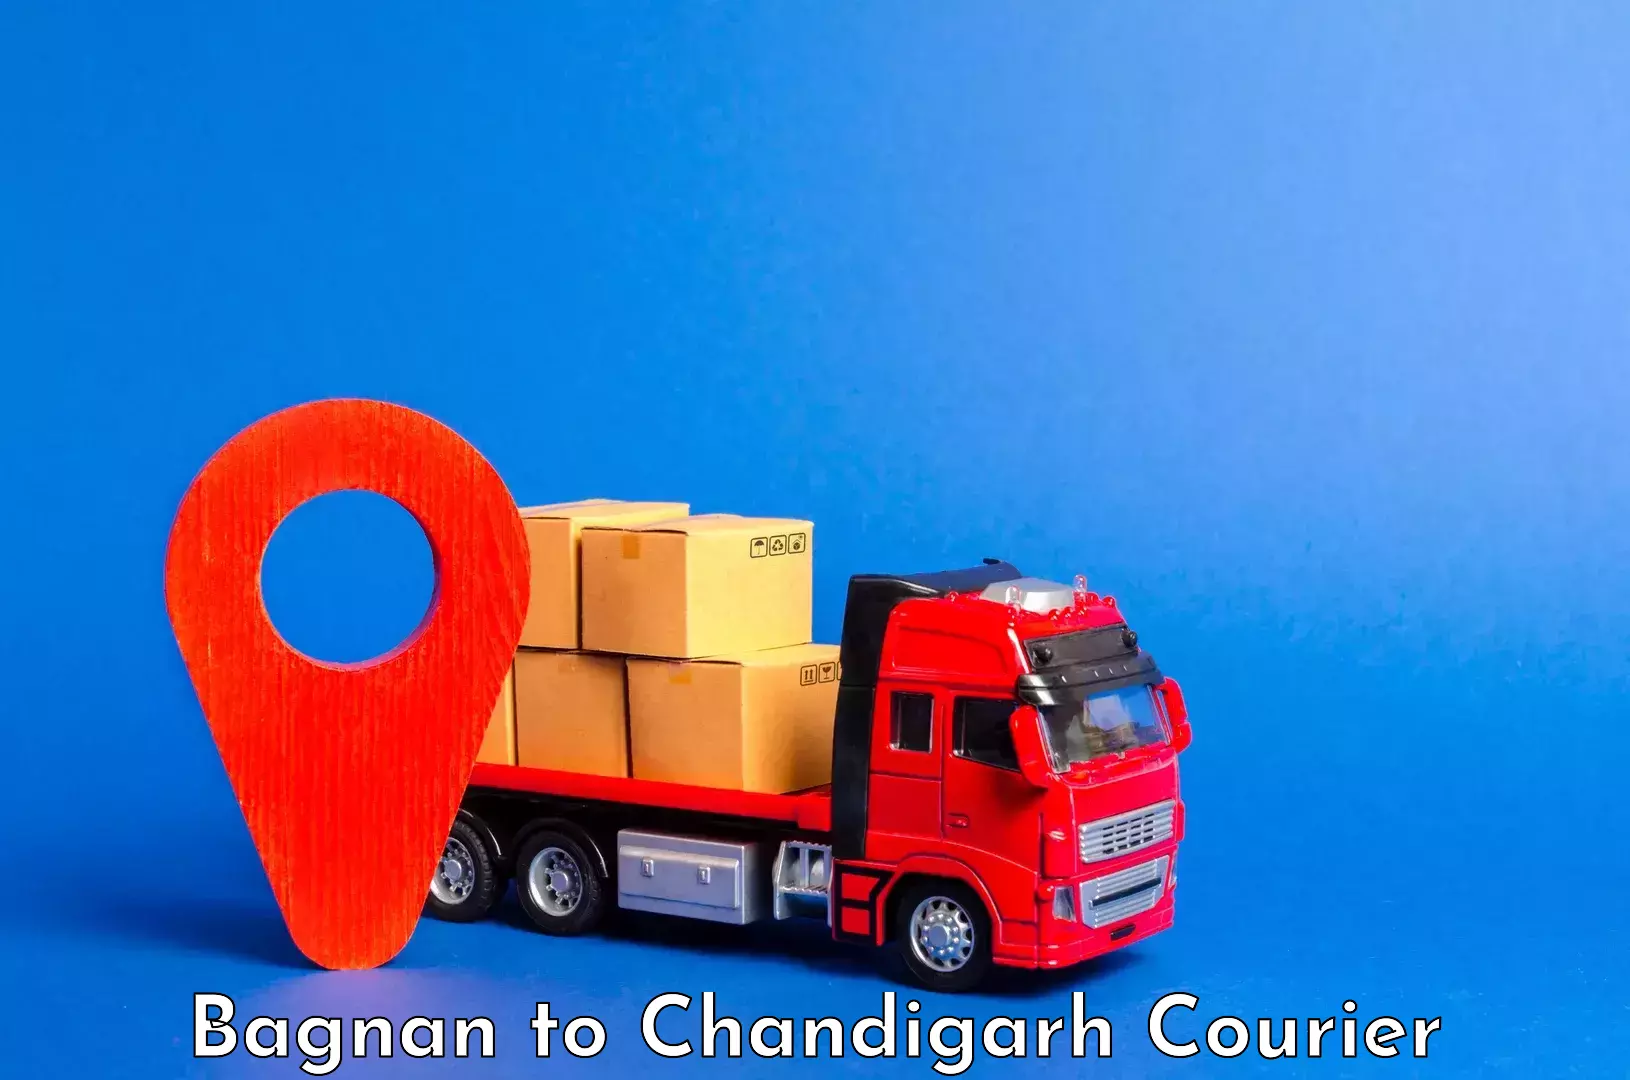 Luggage shipment processing Bagnan to Chandigarh